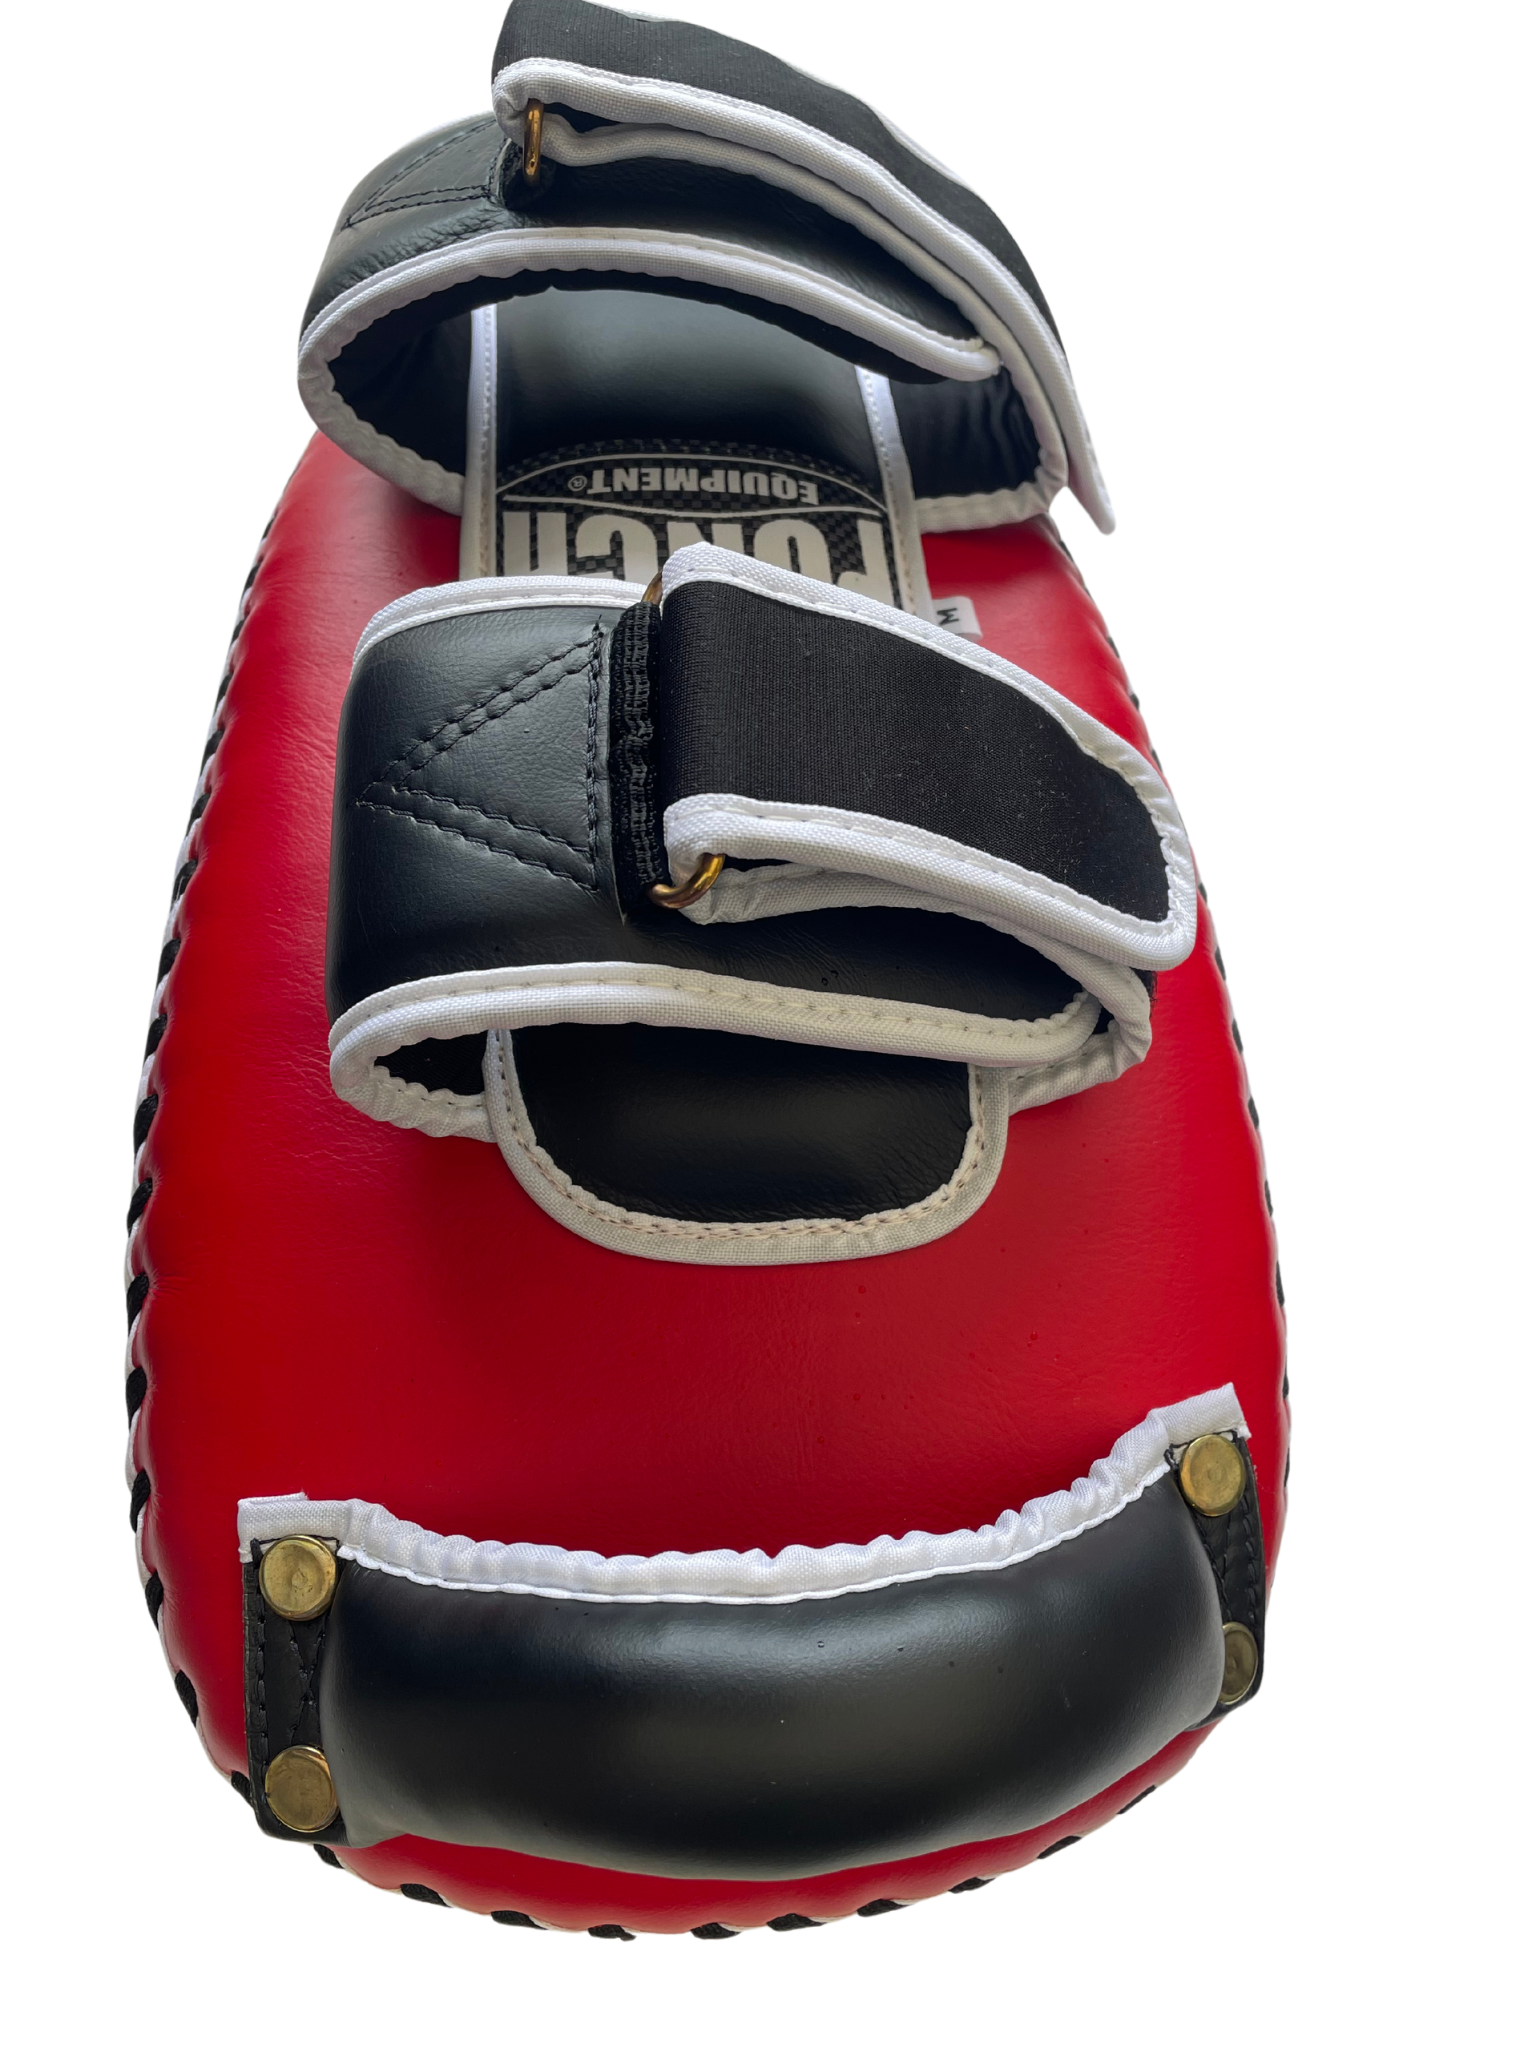 THAI PAD - Siam™ - LEATHER - CURVED - DOUBLE STRAP - RED/WHITE